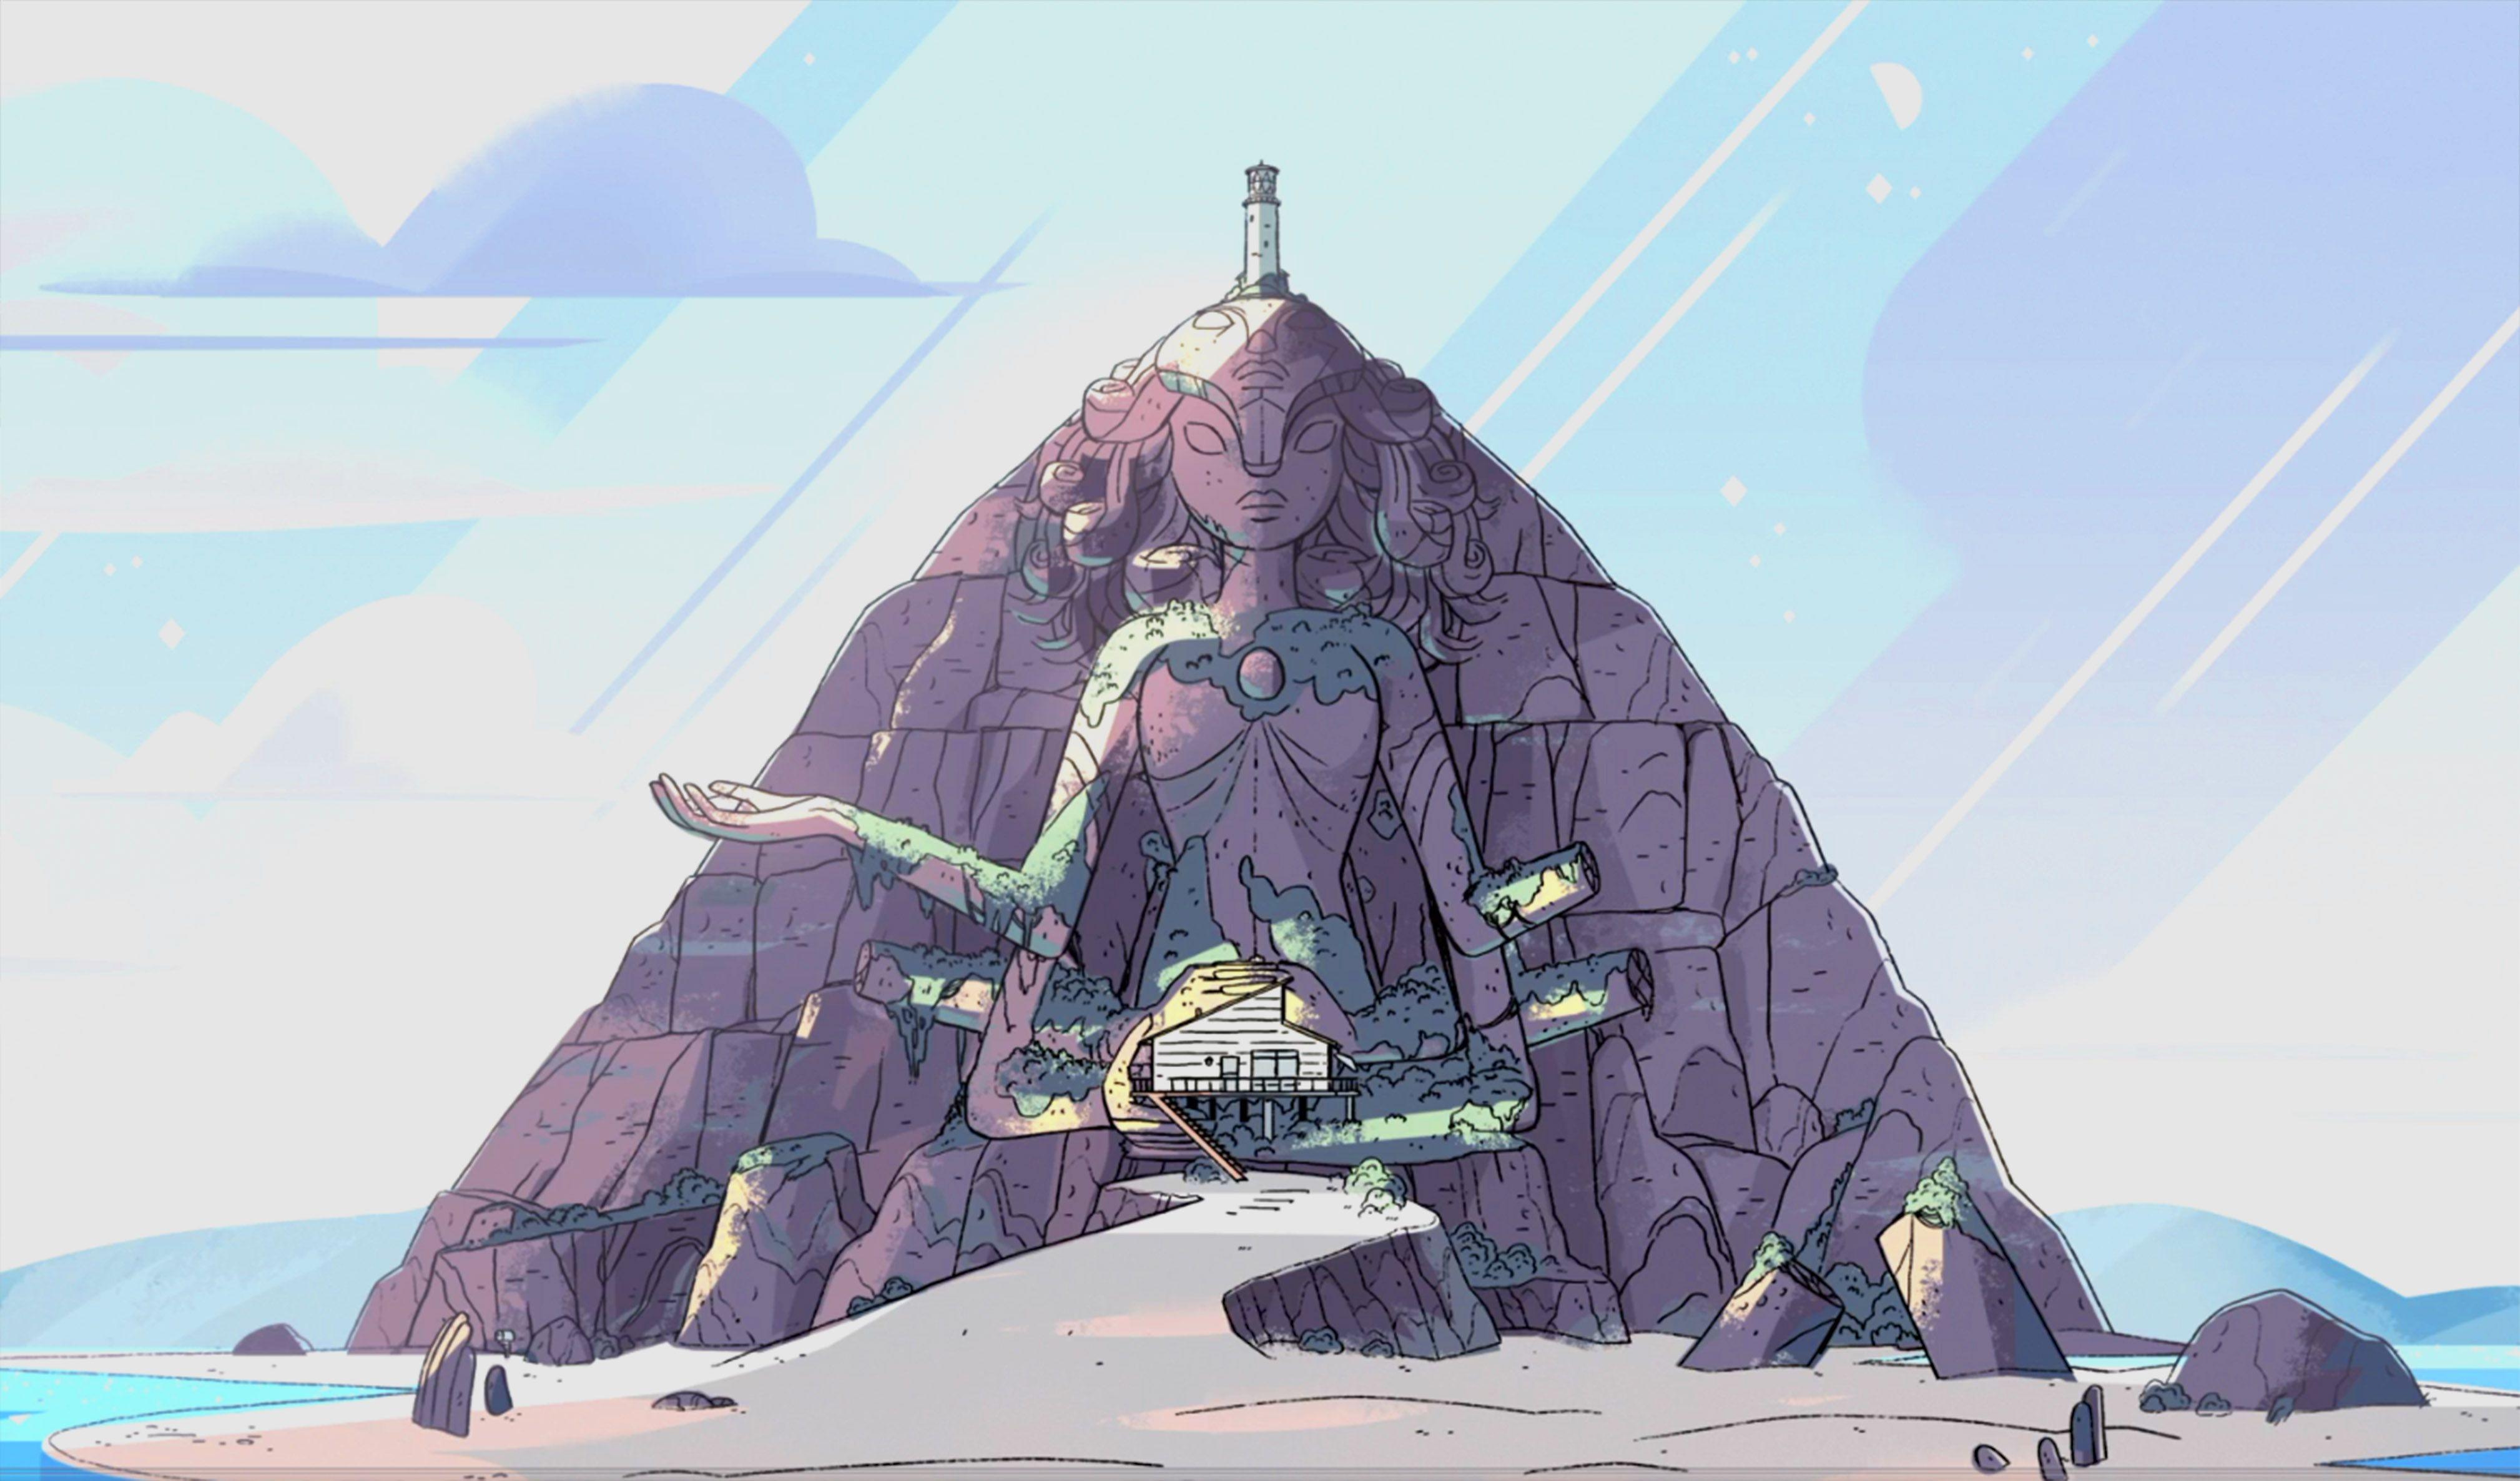 background for any steven universe fans out there. hopefully